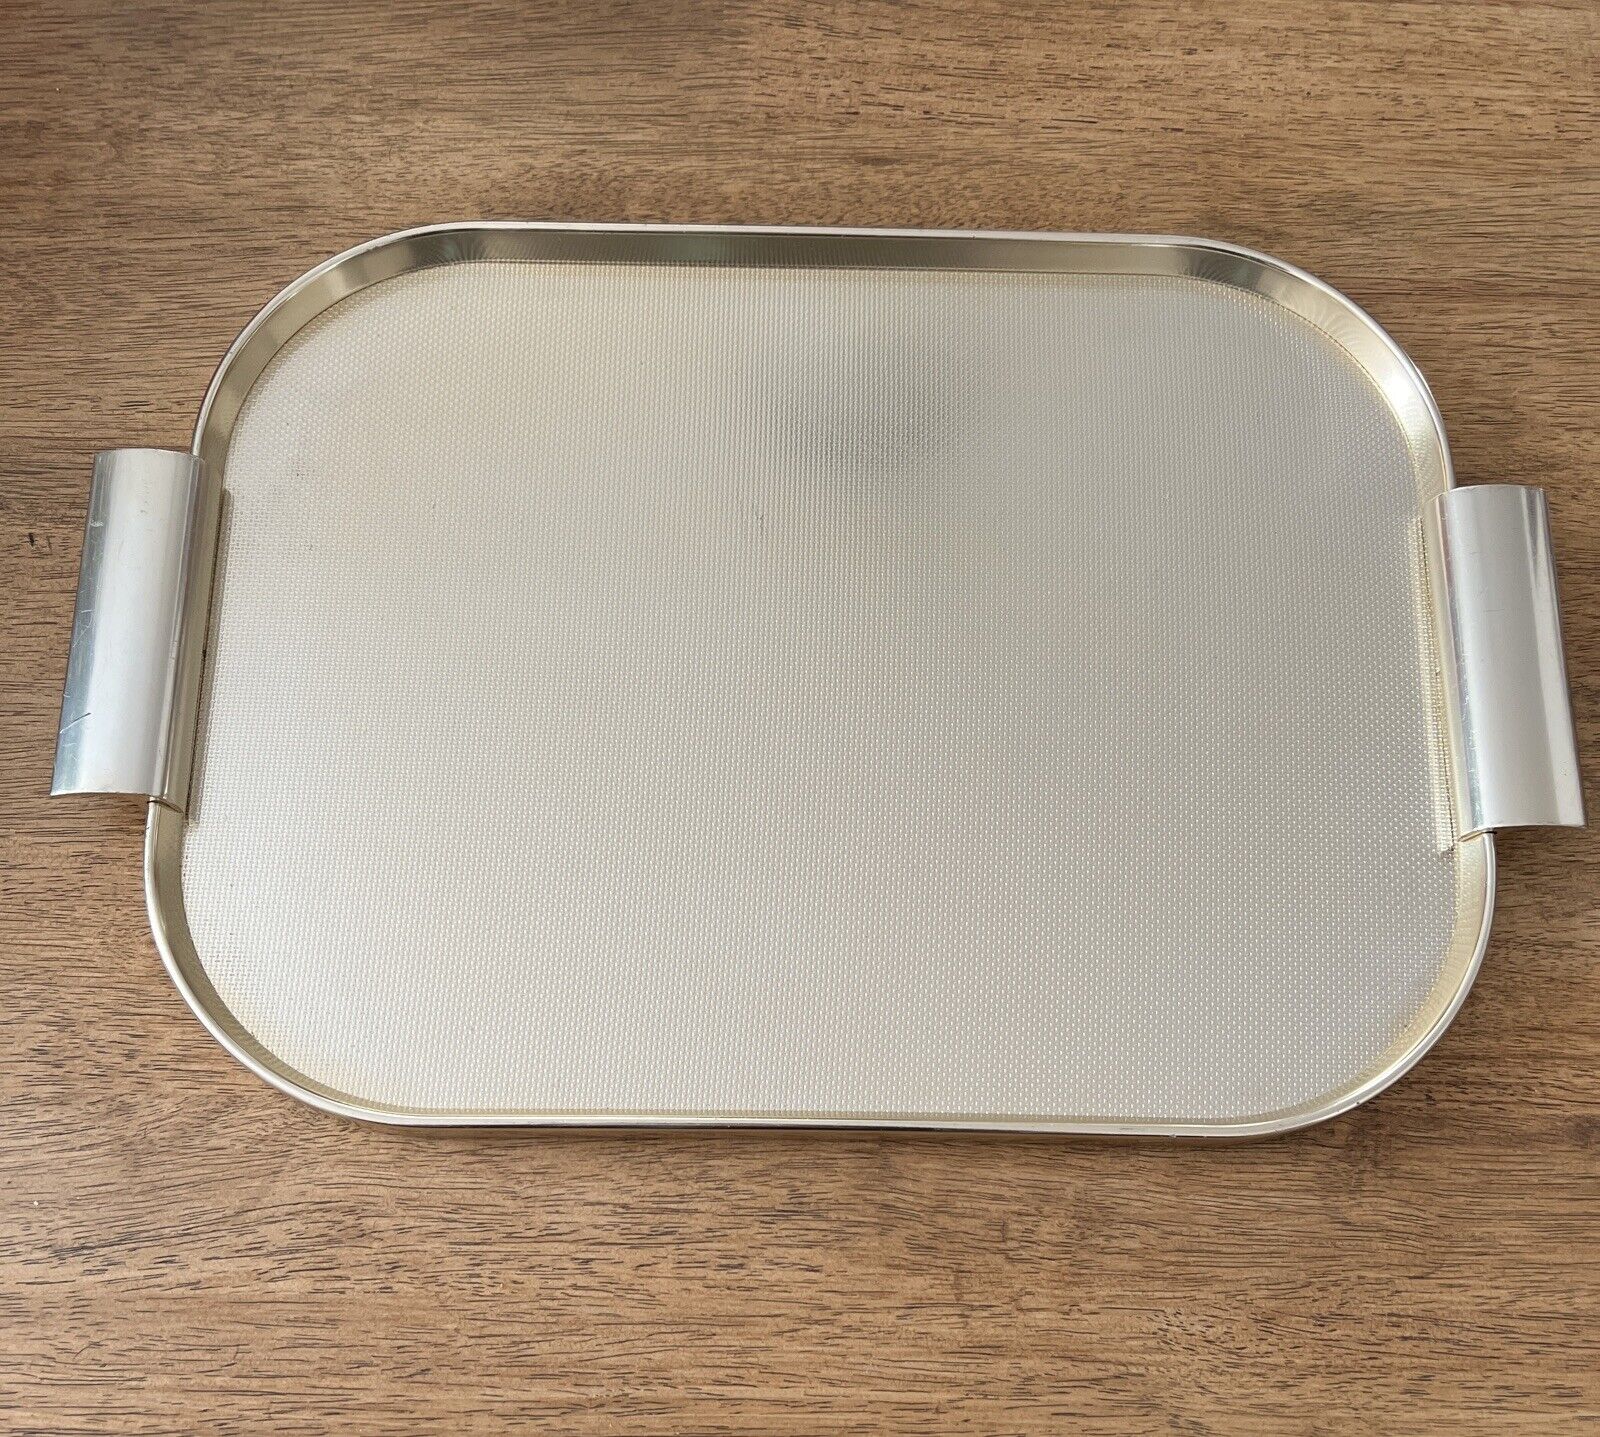 Vintage Kaymet Anodised Ware Tray Made In England Golden Lap Table Serving